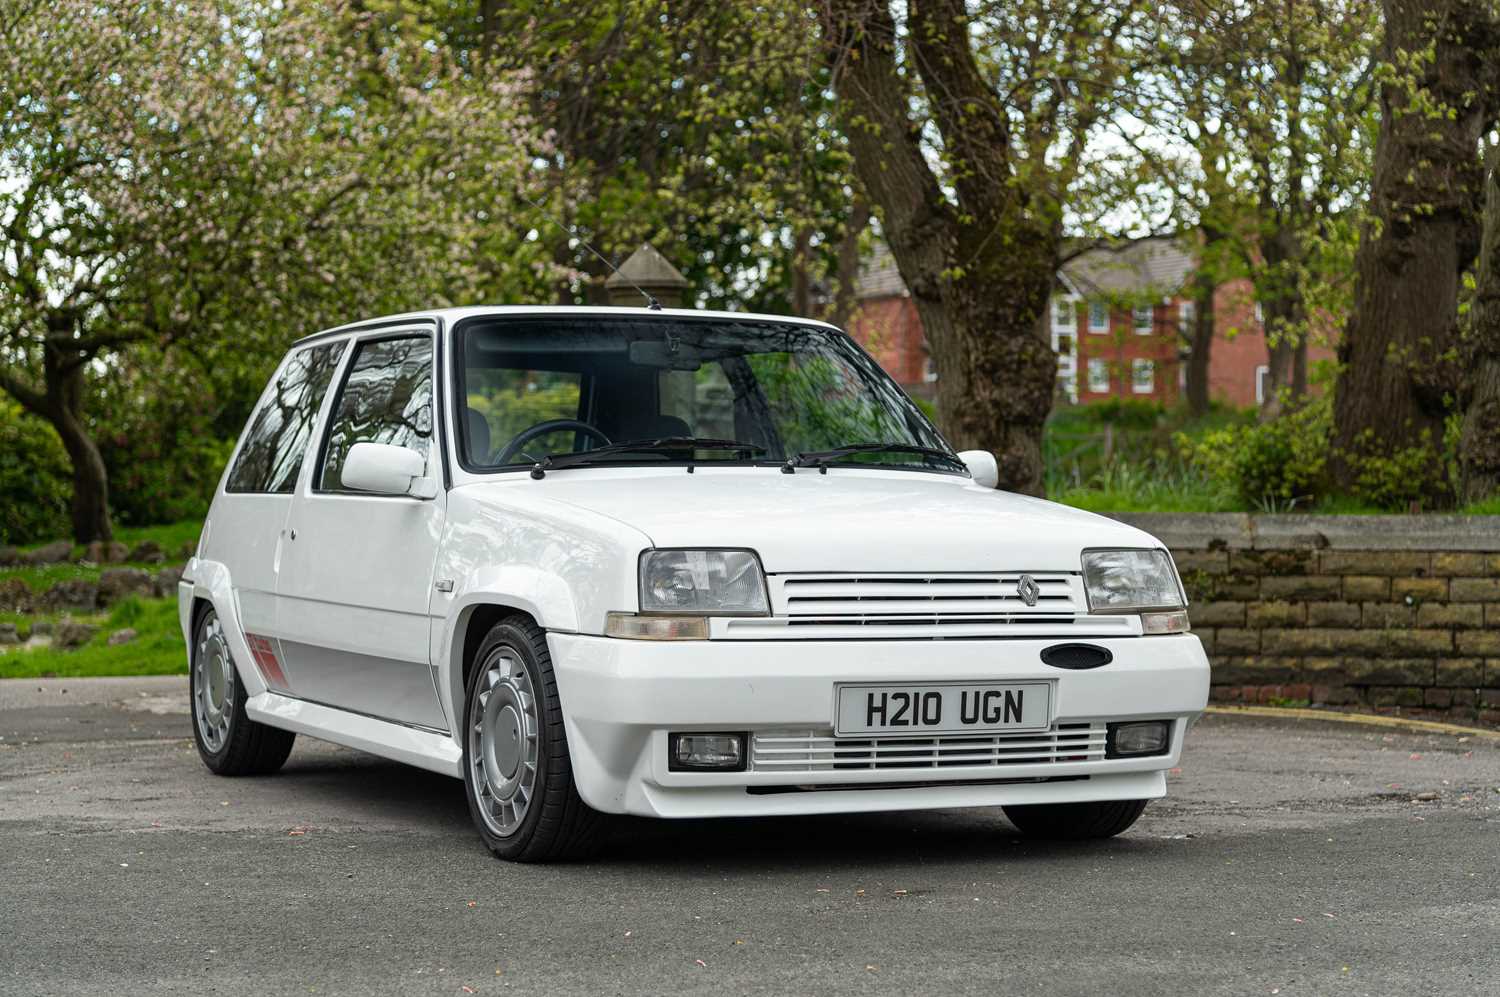 1990 Renault 5 GT Turbo - Image 79 of 79